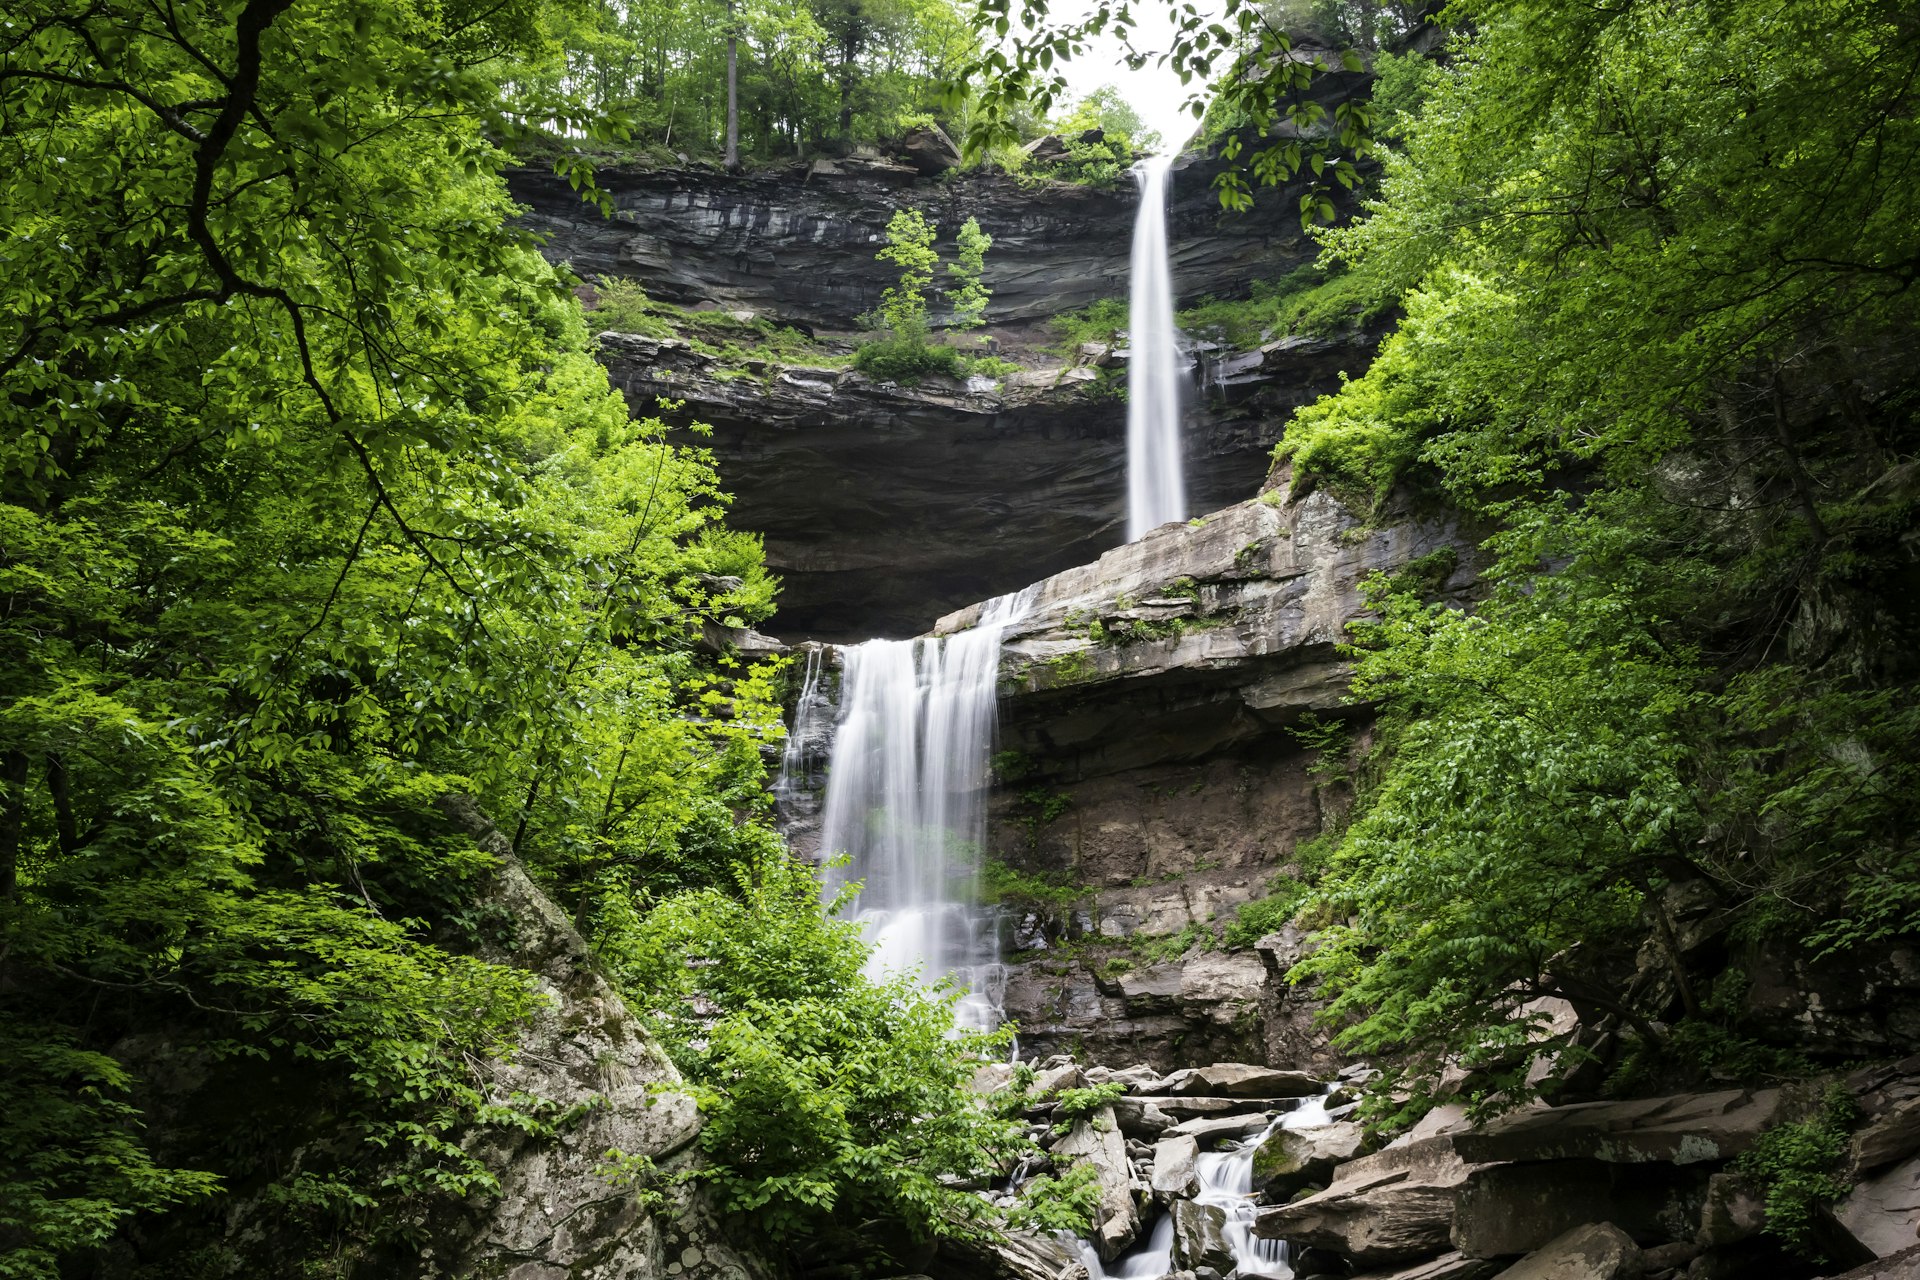 Long exposure of the two-tier Kaaterskill Falls surrounded by lush green trees during Summer